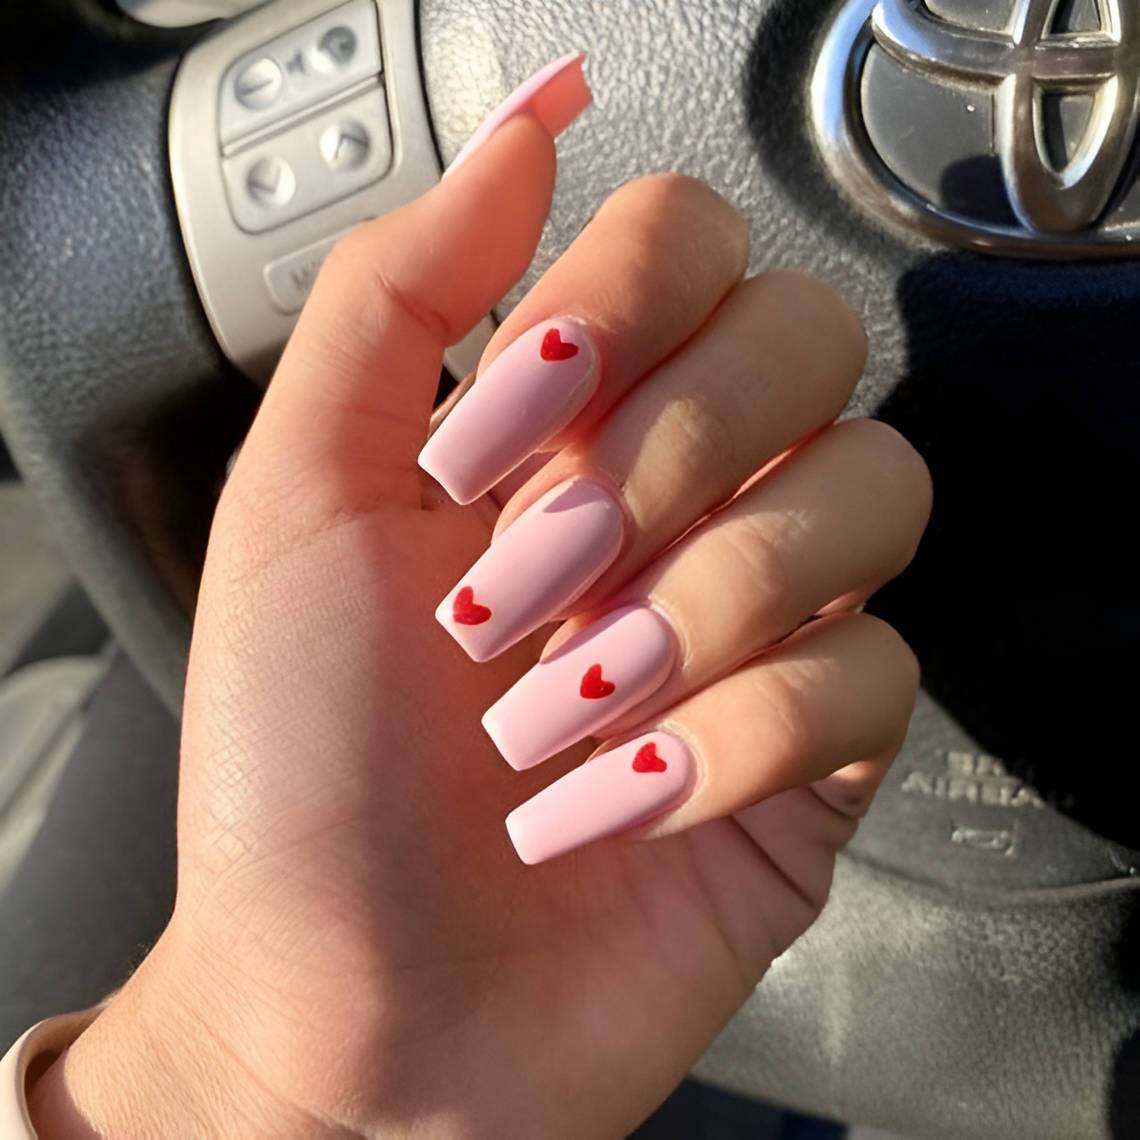 30 Stunning Square Nail Designs To Vamp Up Your Manicure Game - 205